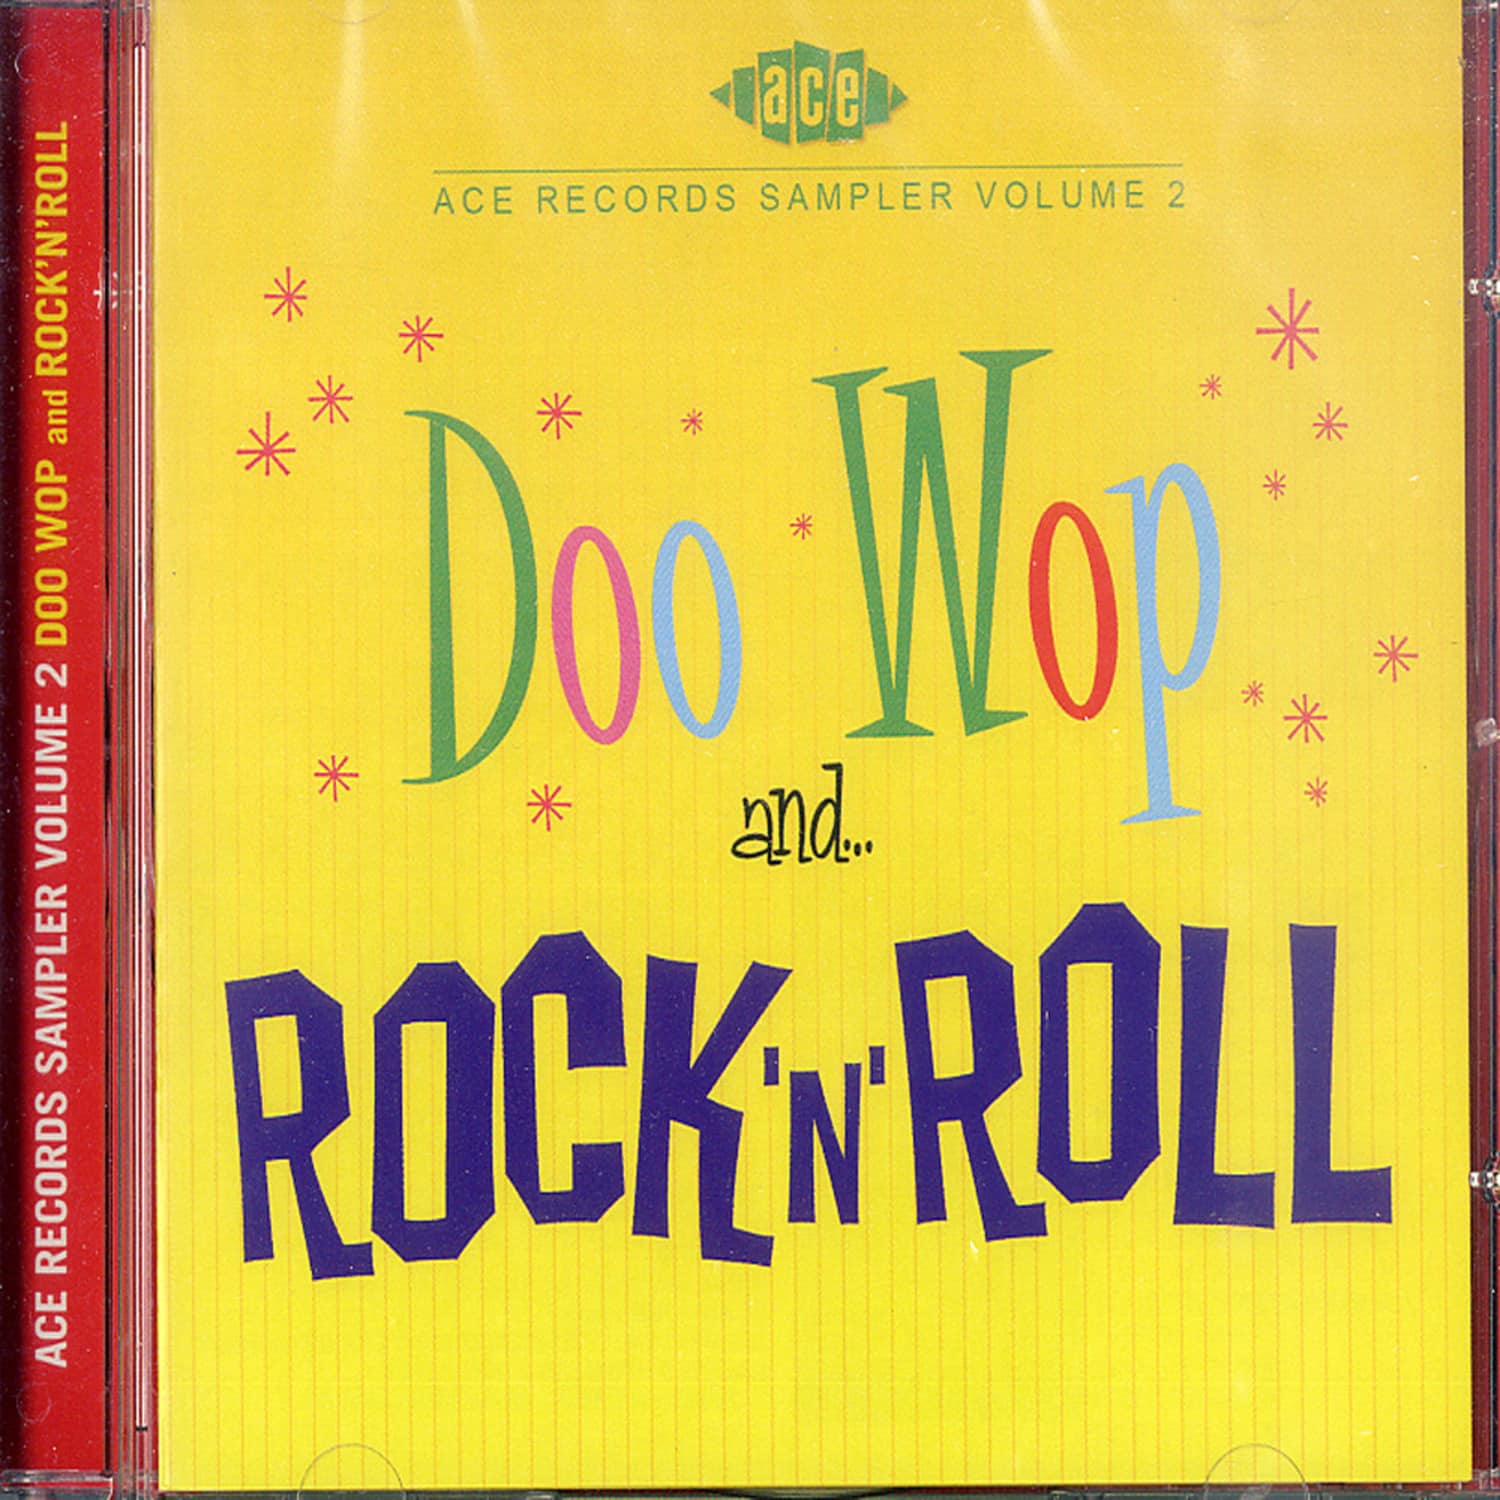 Ace Records Sampler vol.2 - DOO WOP AND ROCK N ROLL 